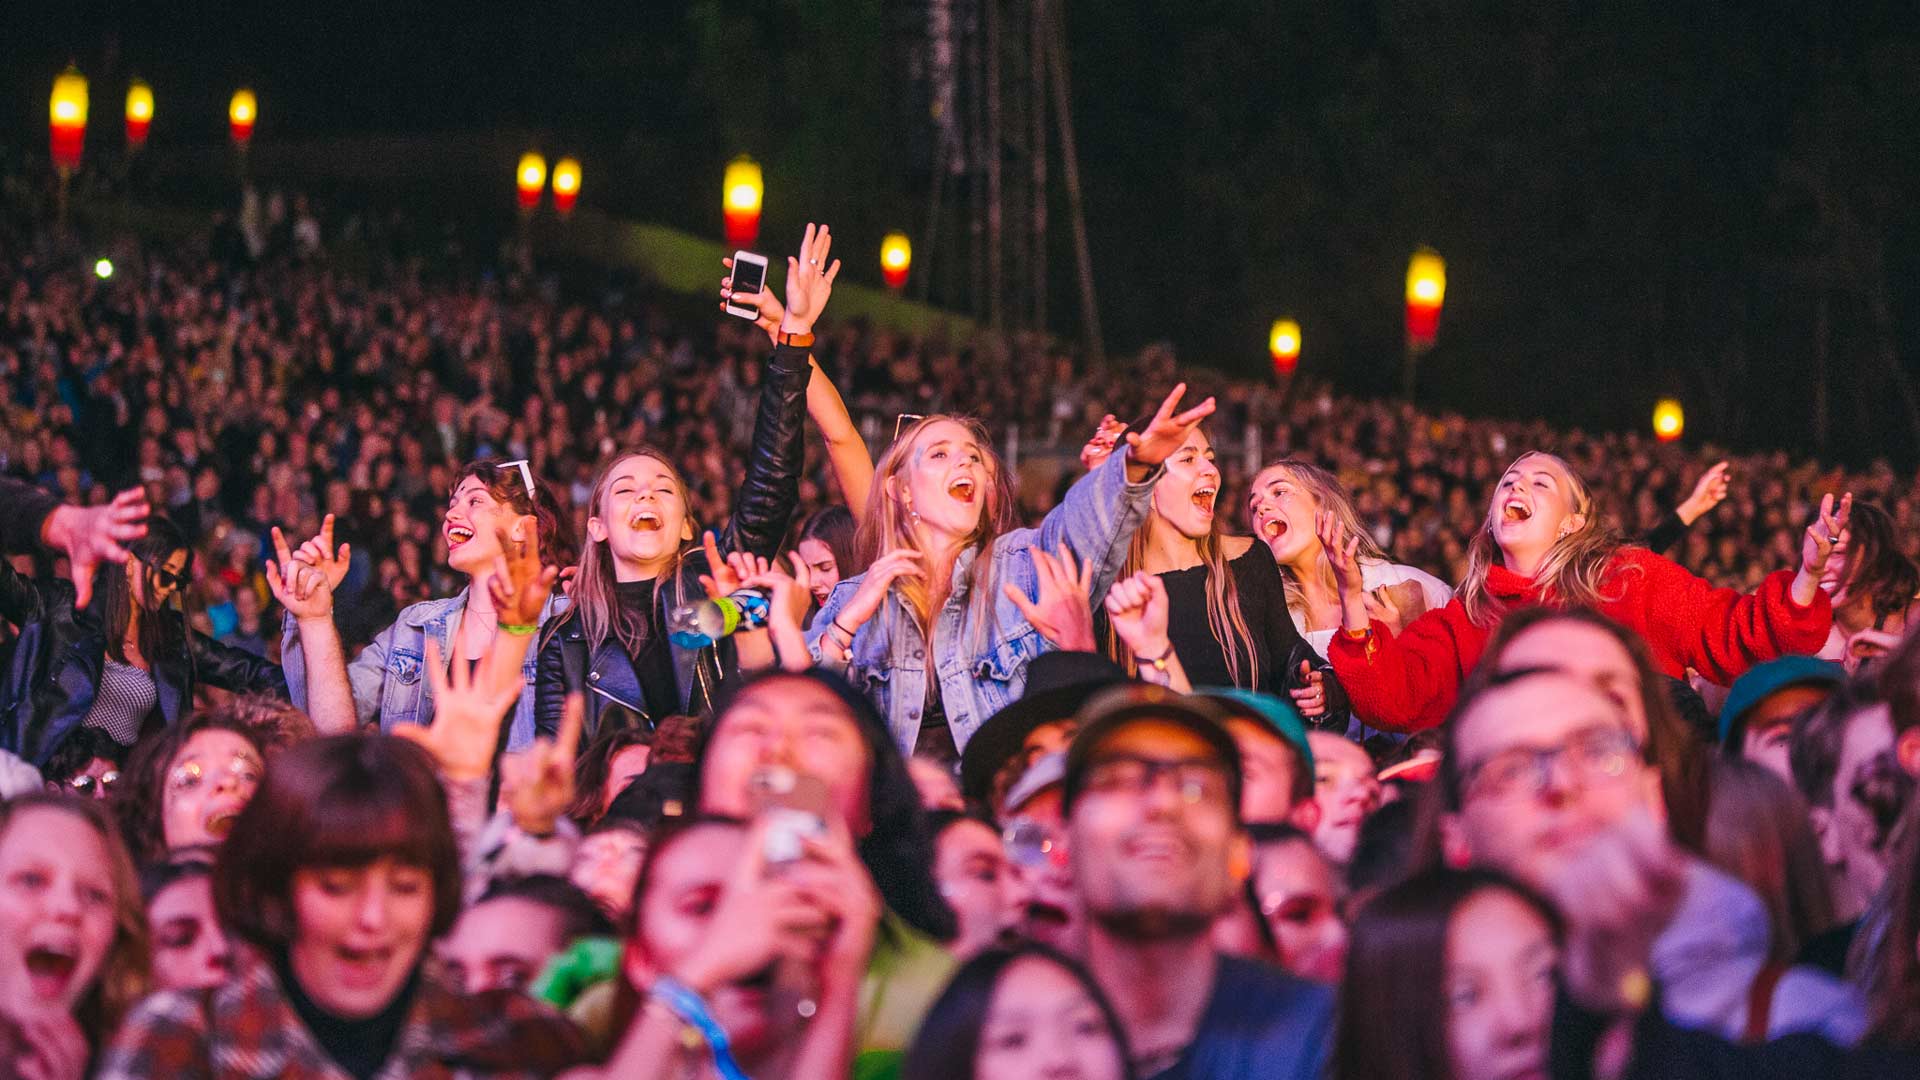 Splendour in the Grass Announces 2019 Lineup Led by Childish Gambino, Chance the Rapper and Tame Impala